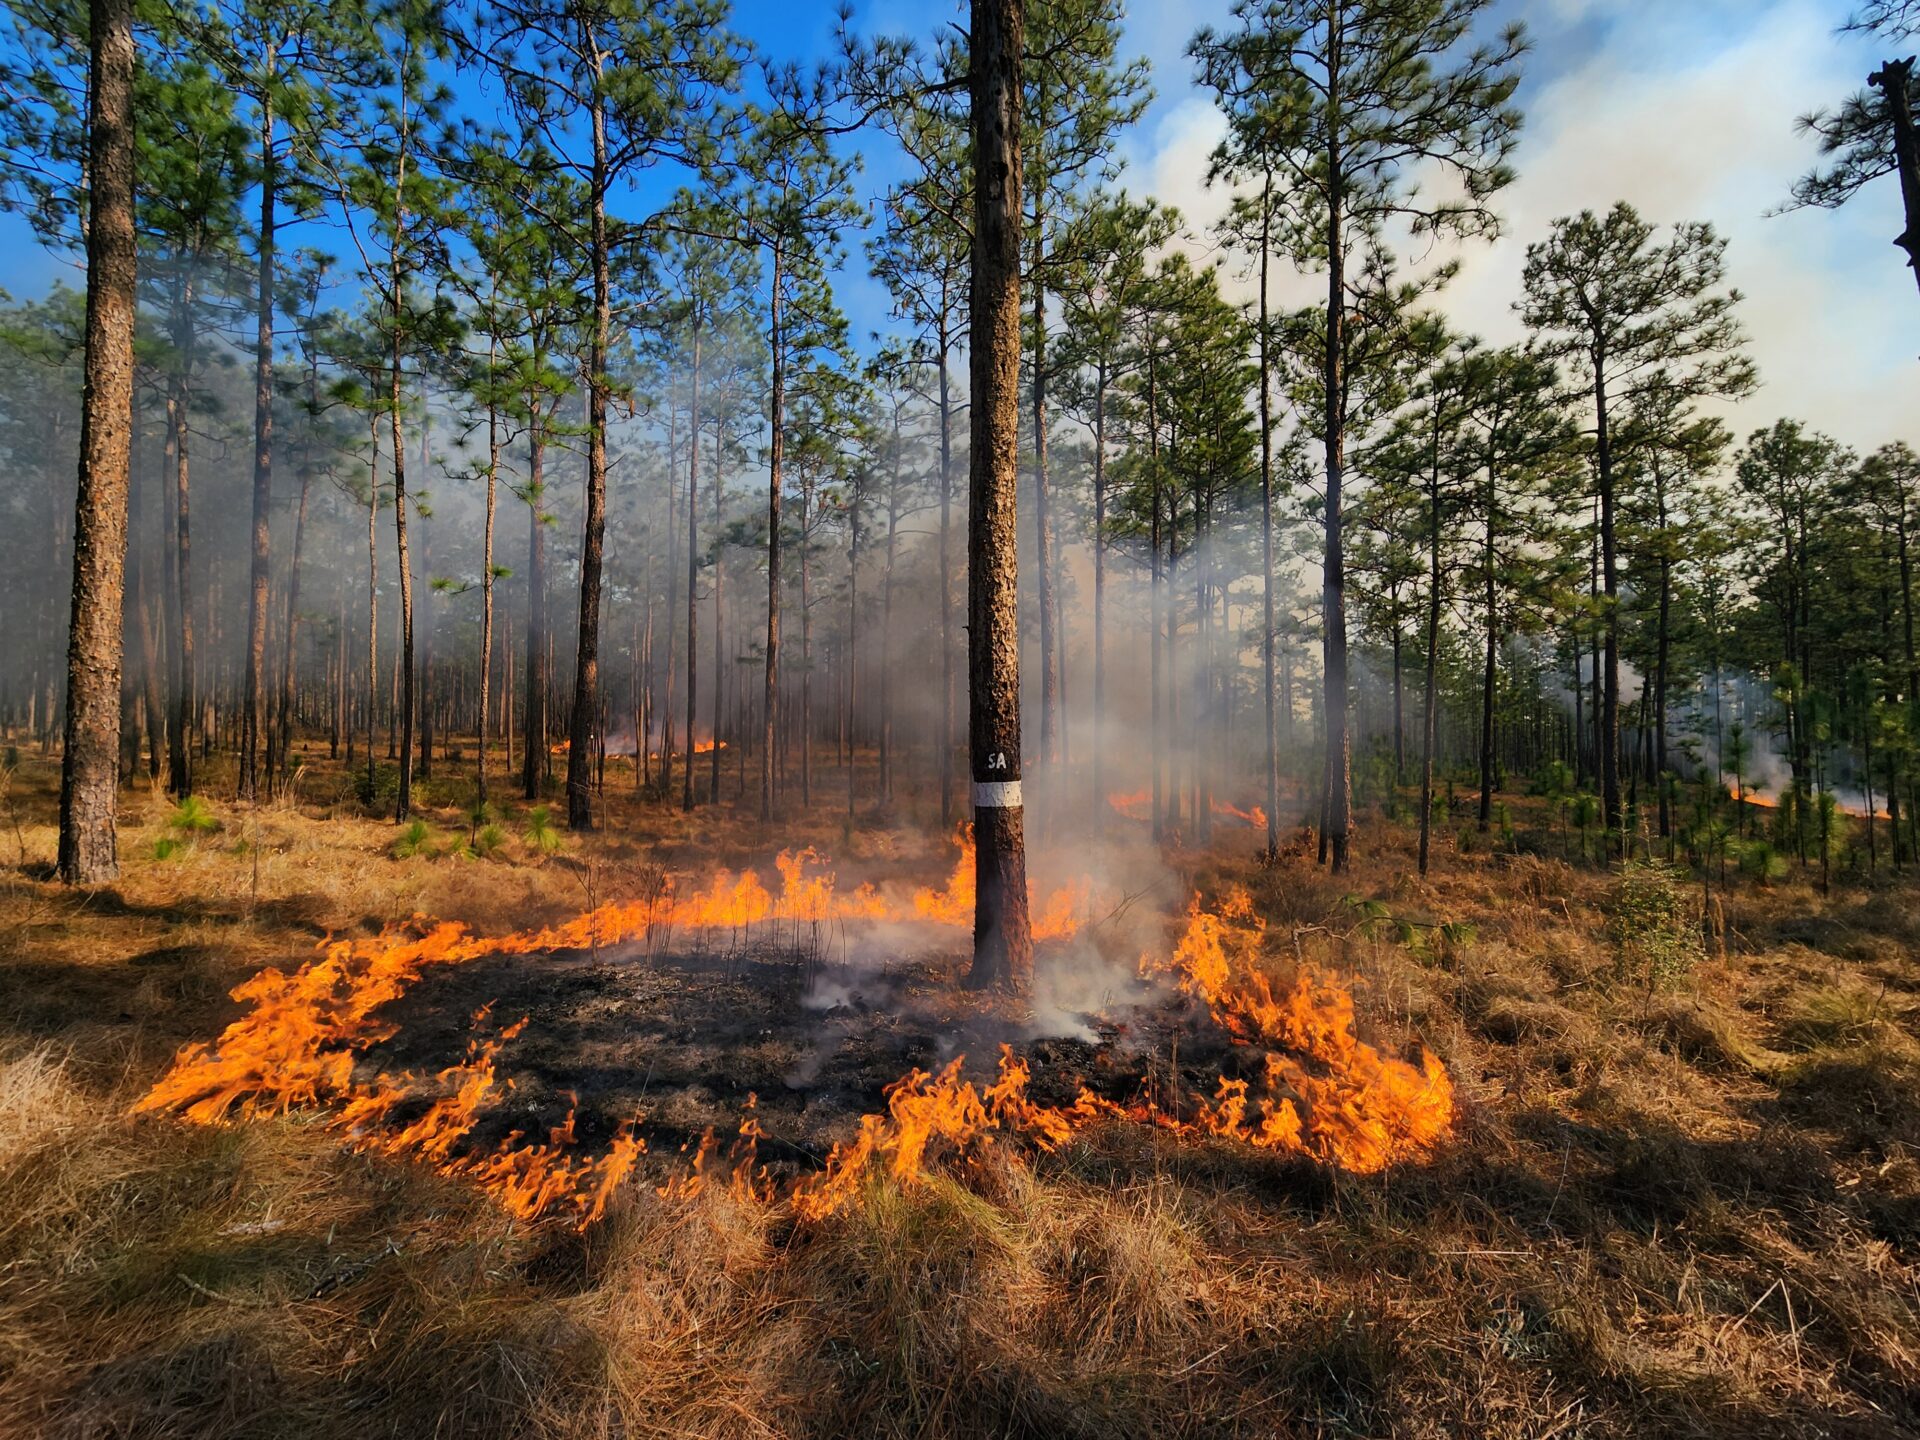 Prescribed fire at Blackwater State Forest. [Jacob Barrett]